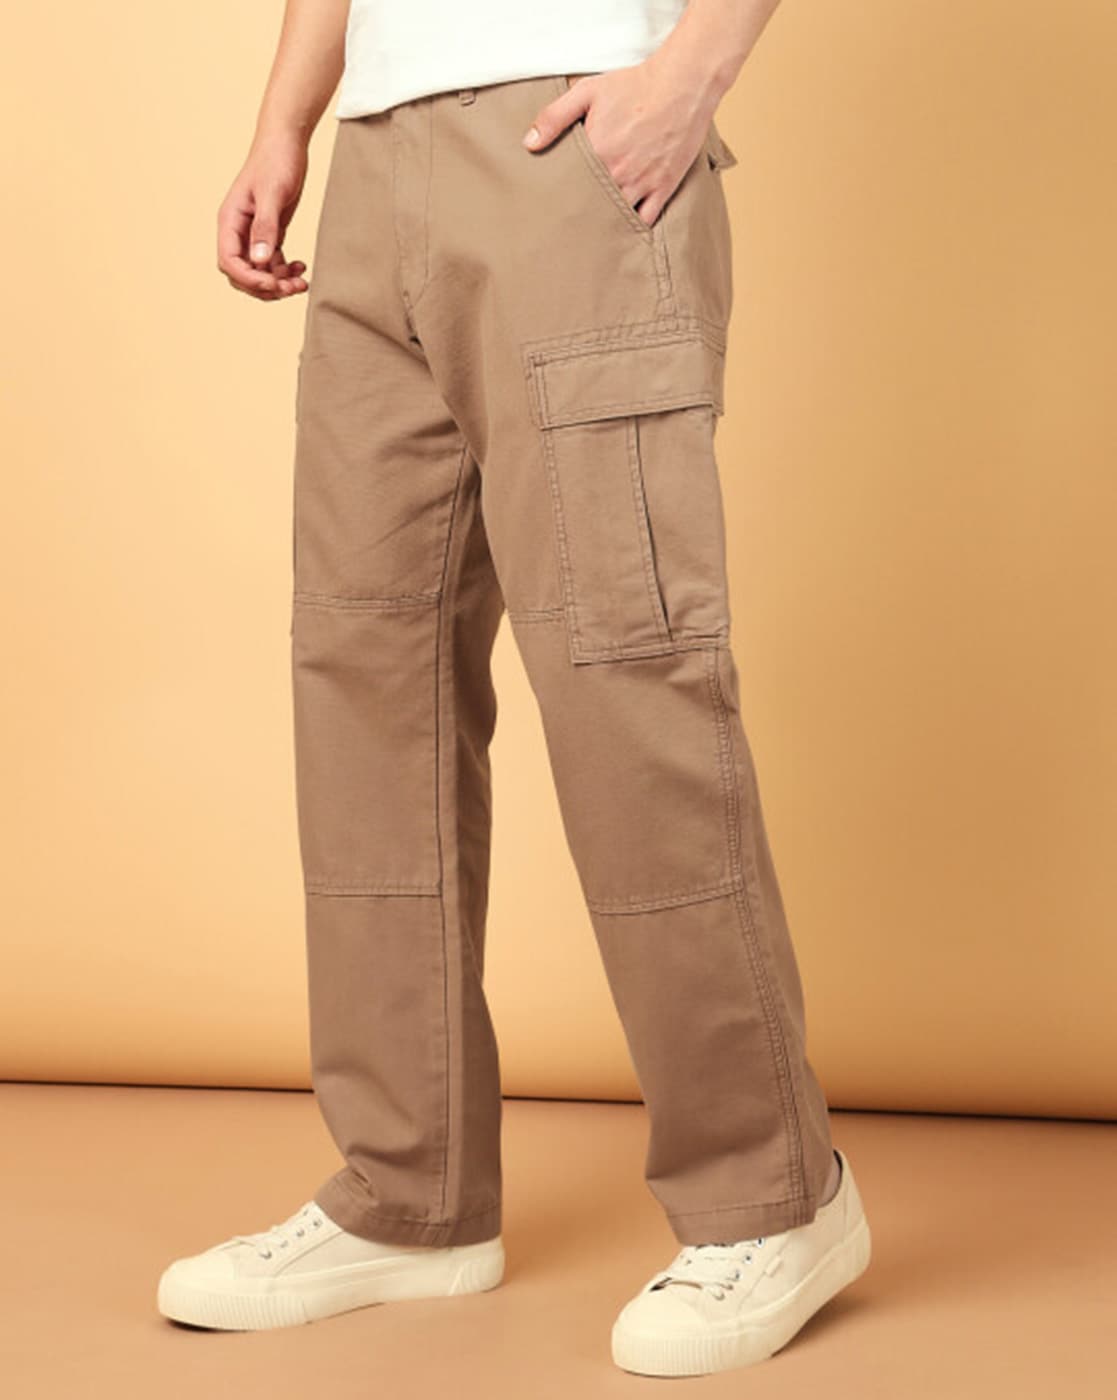 Casual Trousers - Buy branded Casual Trousers online cotton, cotton blend,  casual wear, party wear, Casual Trousers for Men at Limeroad. | page 4